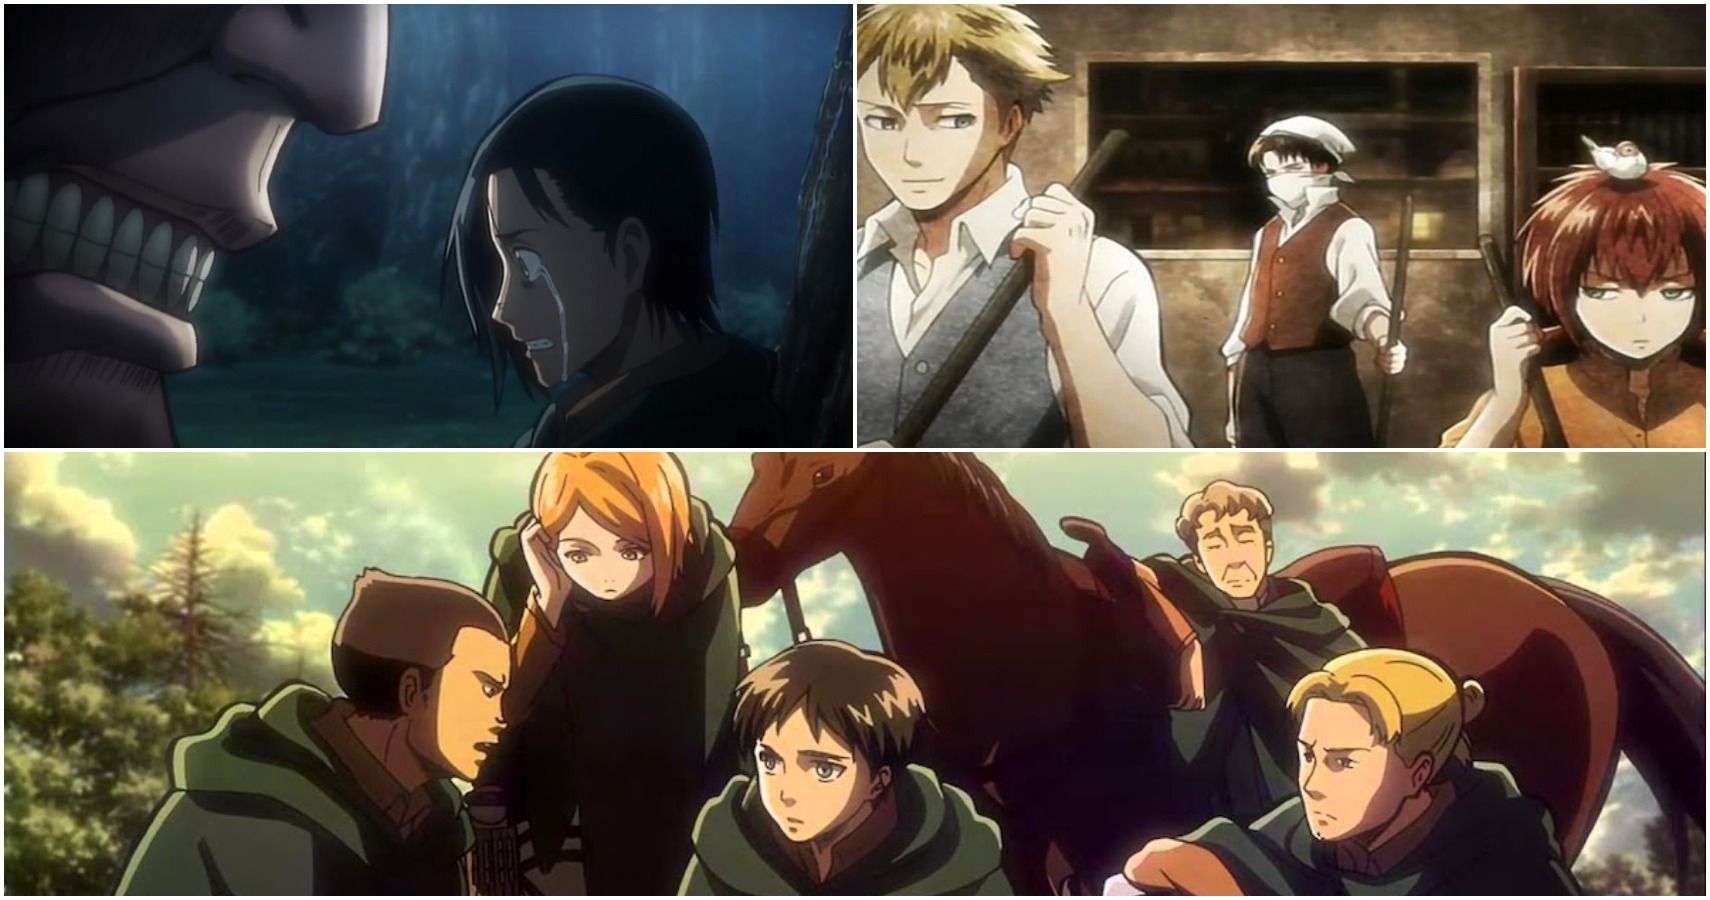 Attack On Titan: The 12 Most Heartbreaking Deaths So Far